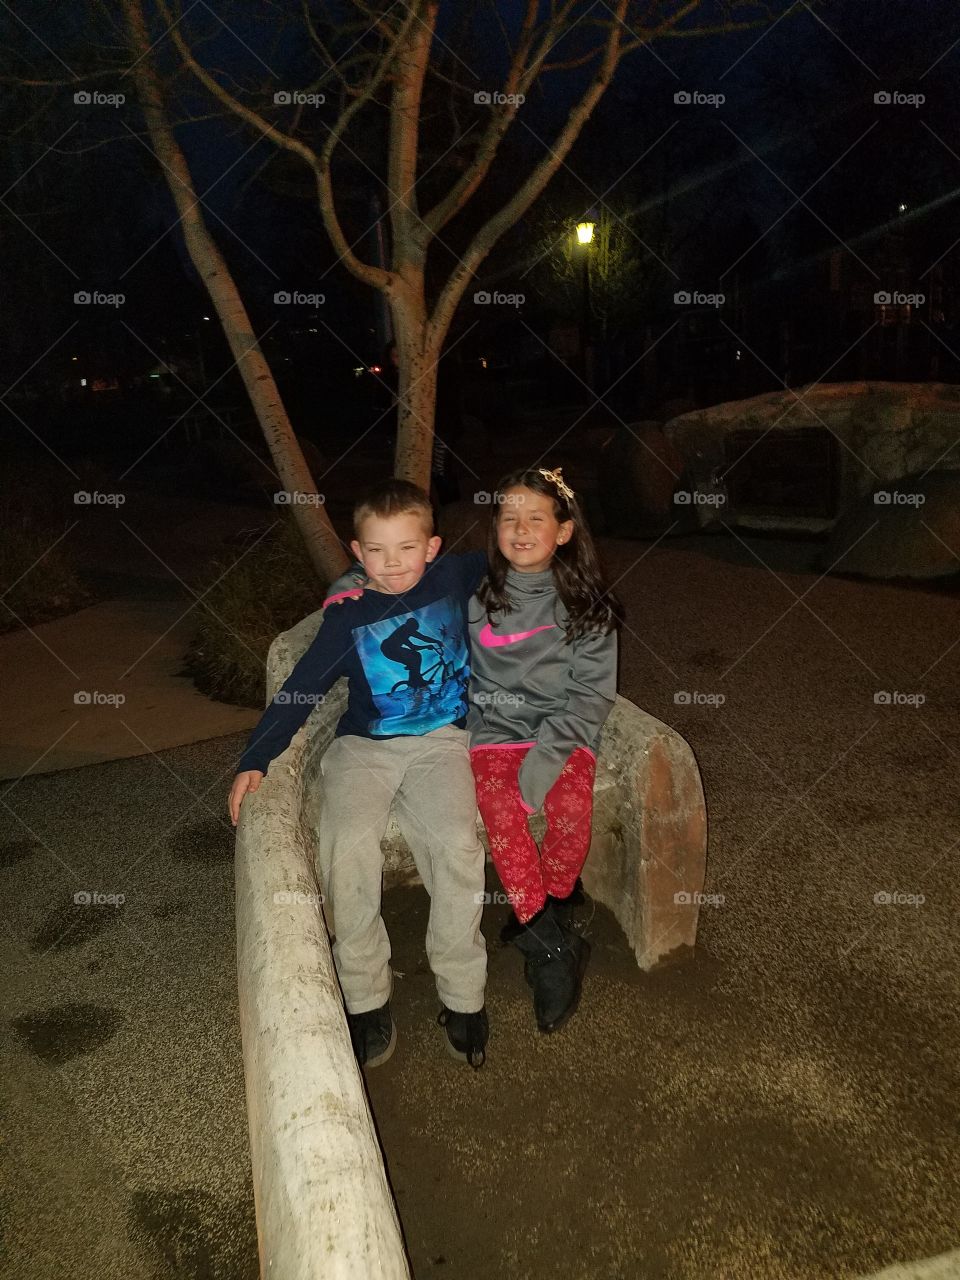 cousins enjoy night time at the park